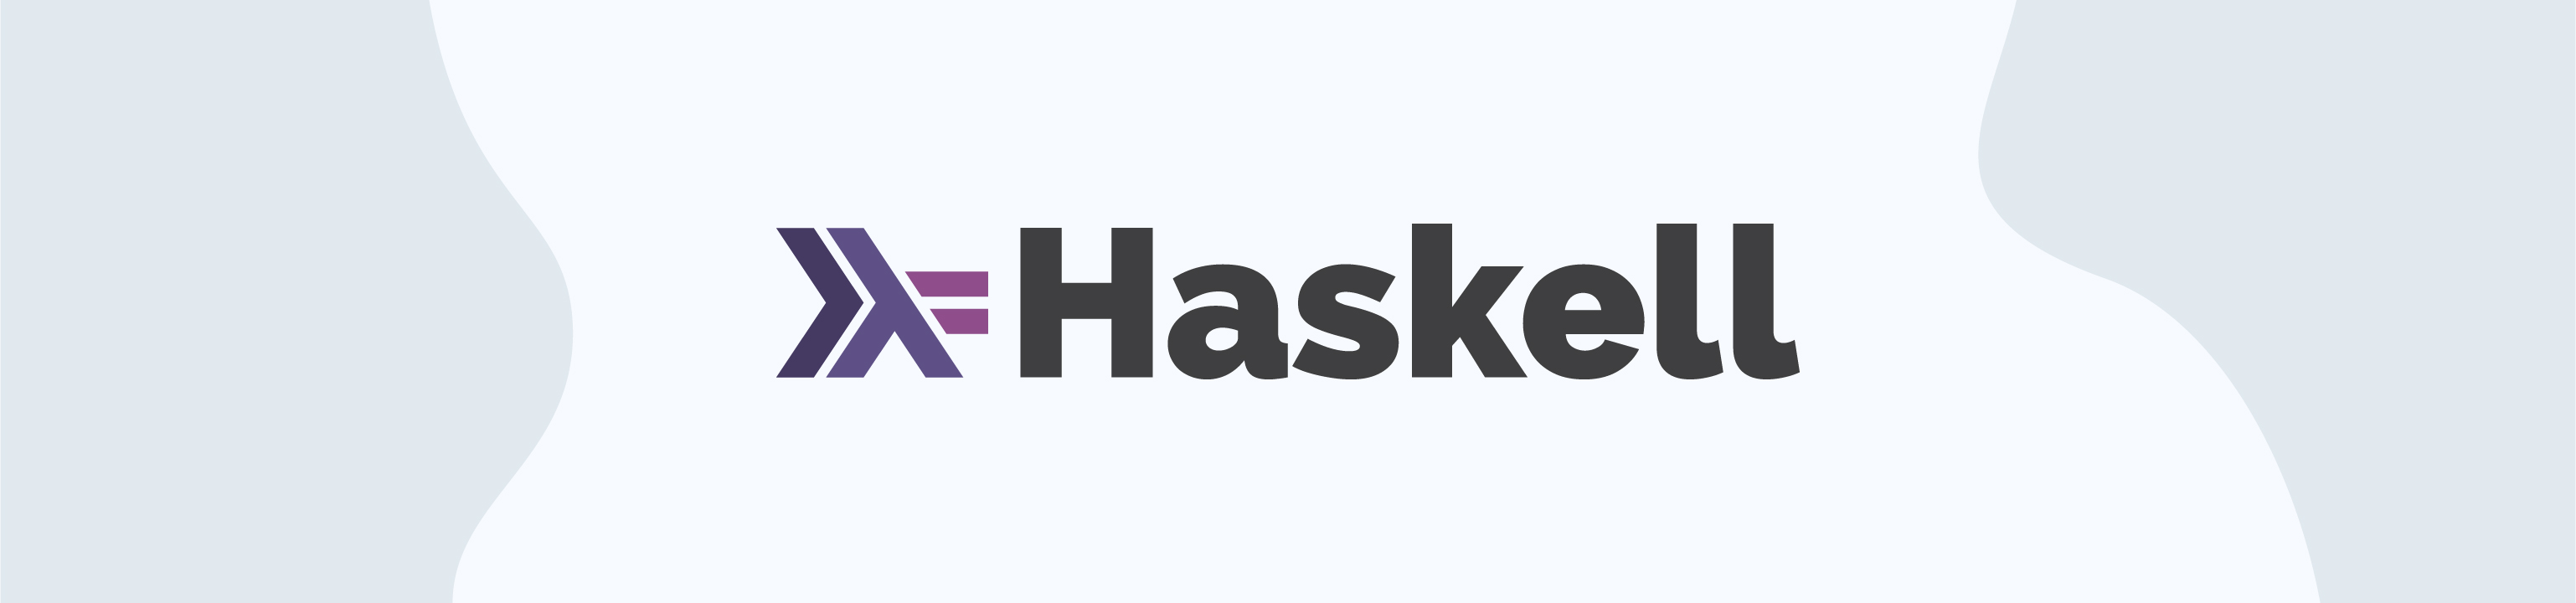 Image — Haskell — language of the future